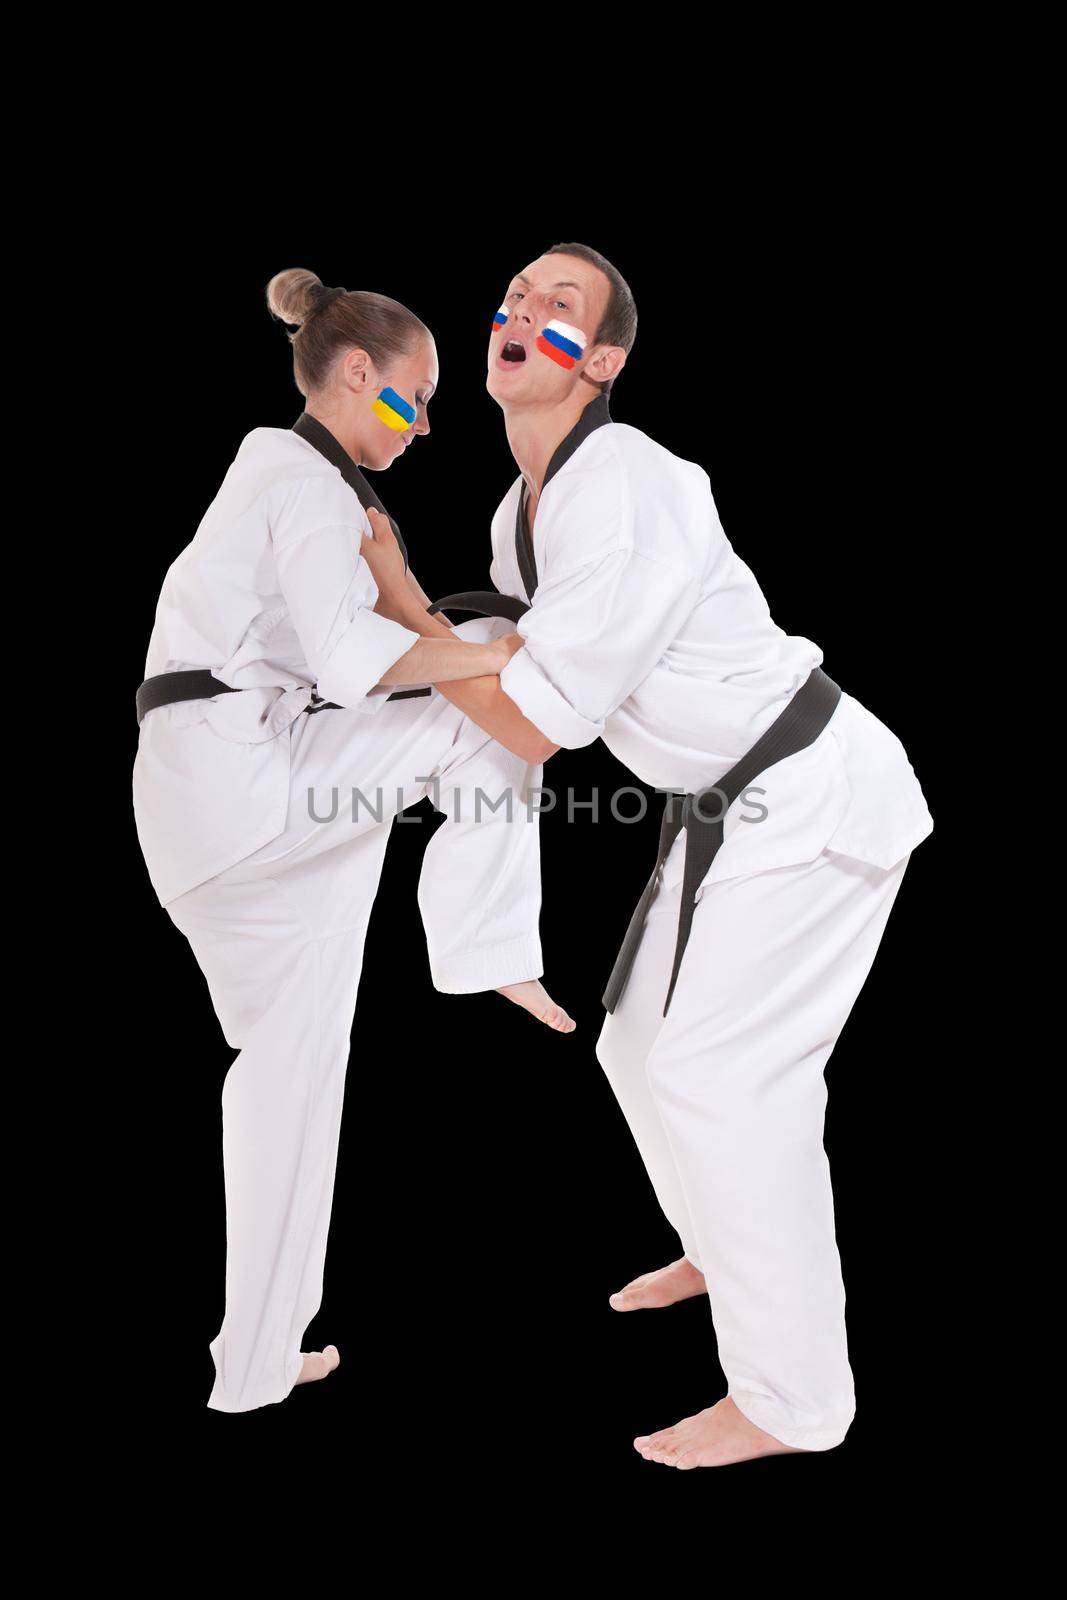 Defense kick of Ukraine and Russia two fighting representatives of different countries. Woman make ankle kick to a man, two fighting people isolated on black background.